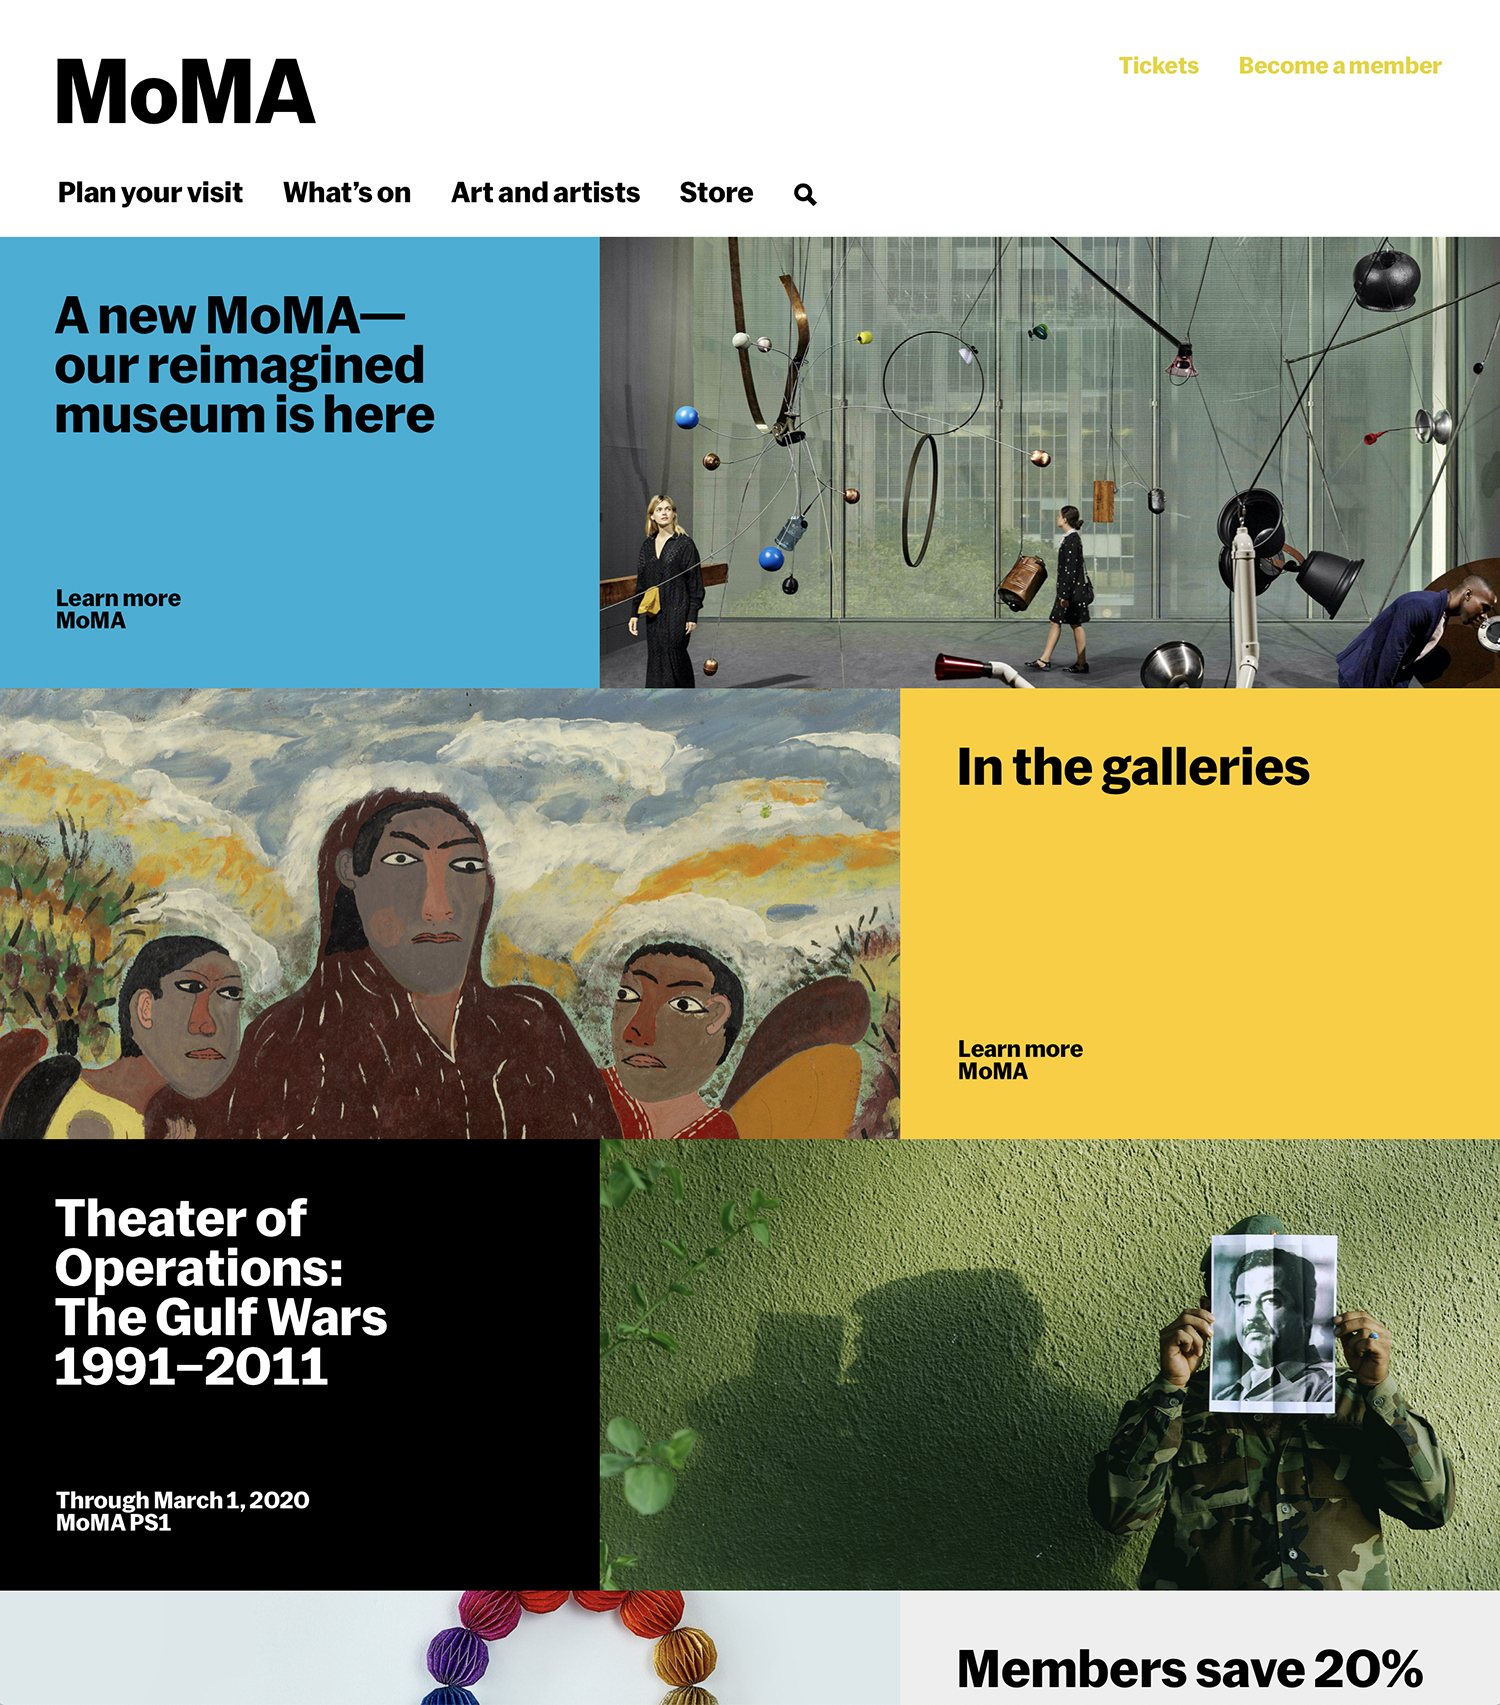 New graphic identity system designed by New York-based Order for MoMA